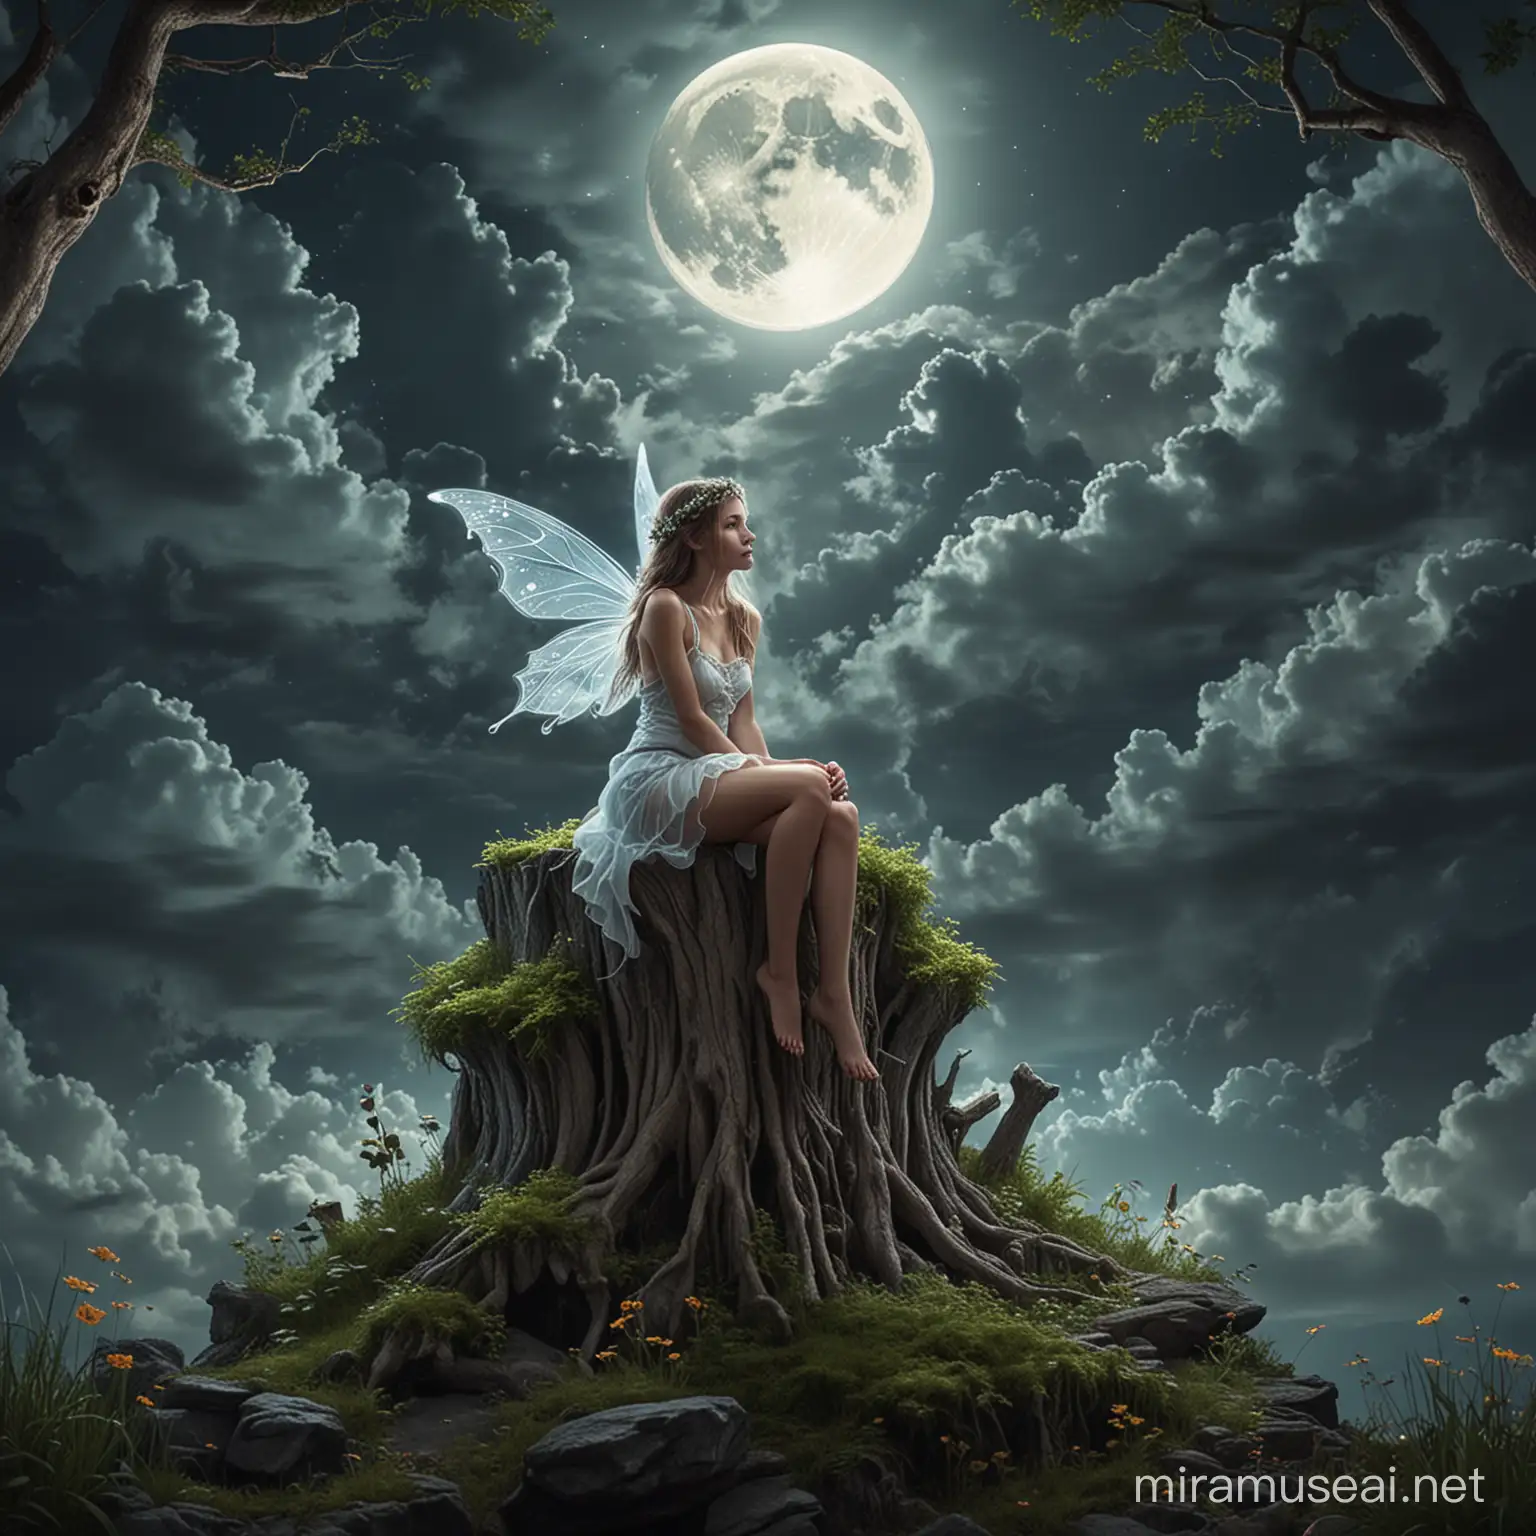 Enchanting Fairy Rests on Moonlit Stump in Mysterious Forest